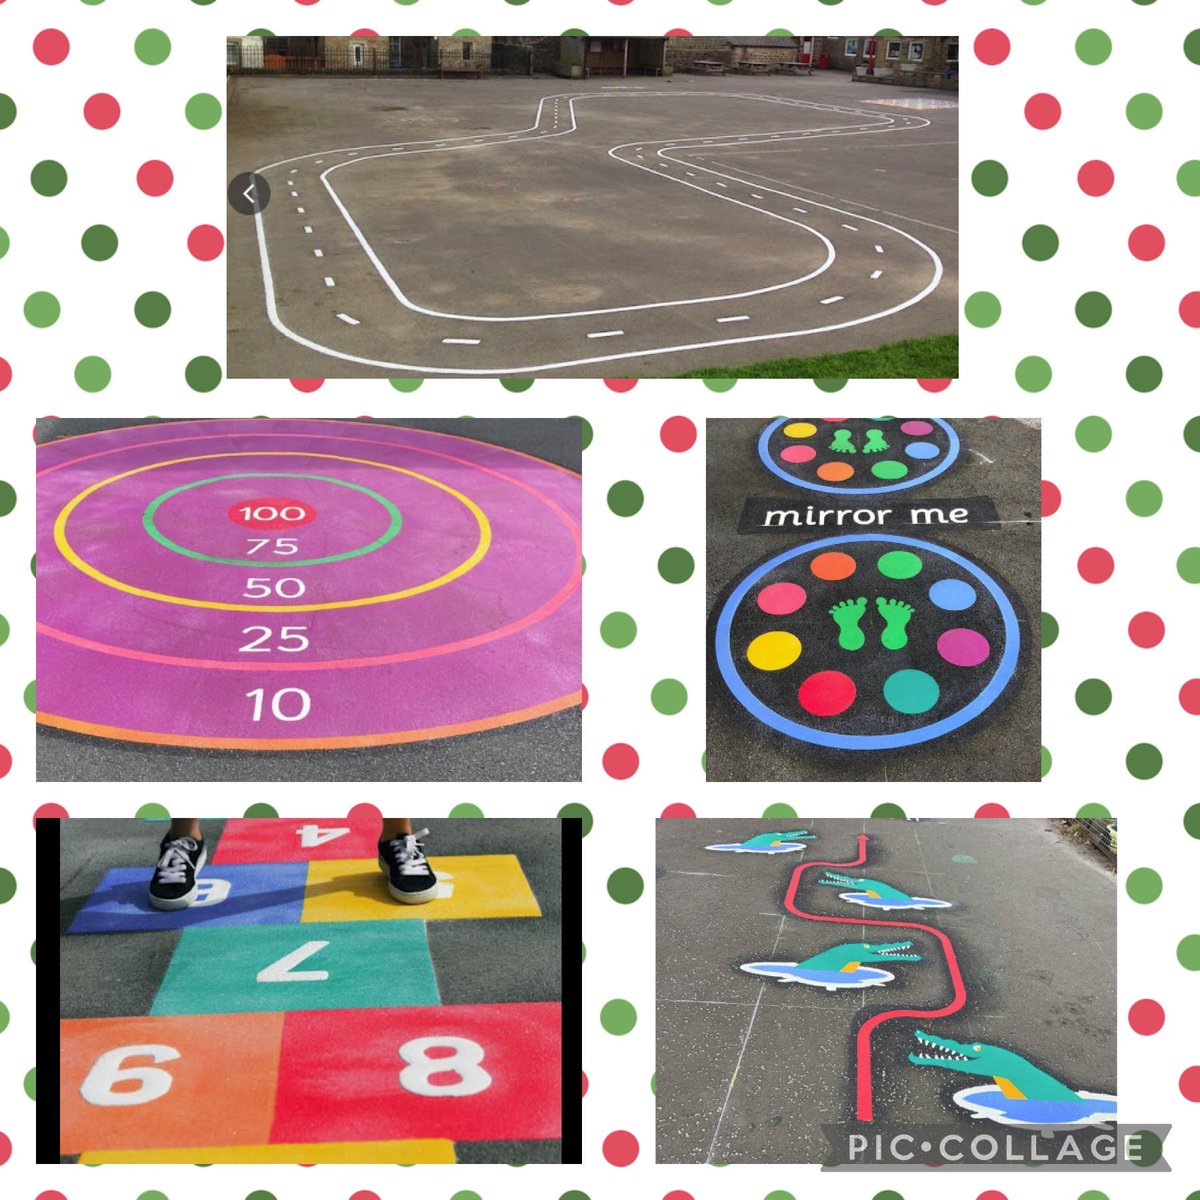 Great News!!! Our @LeithChooses bid has been successful! We will ask pupils to choose our playground markings for better outdoor learning. A ‘road track’ , Giant snakes and ladders, Mirror me’ circles, Giant Twister, Throw targets are possibilities. @LfSScotland @LoveOutdoorLea1